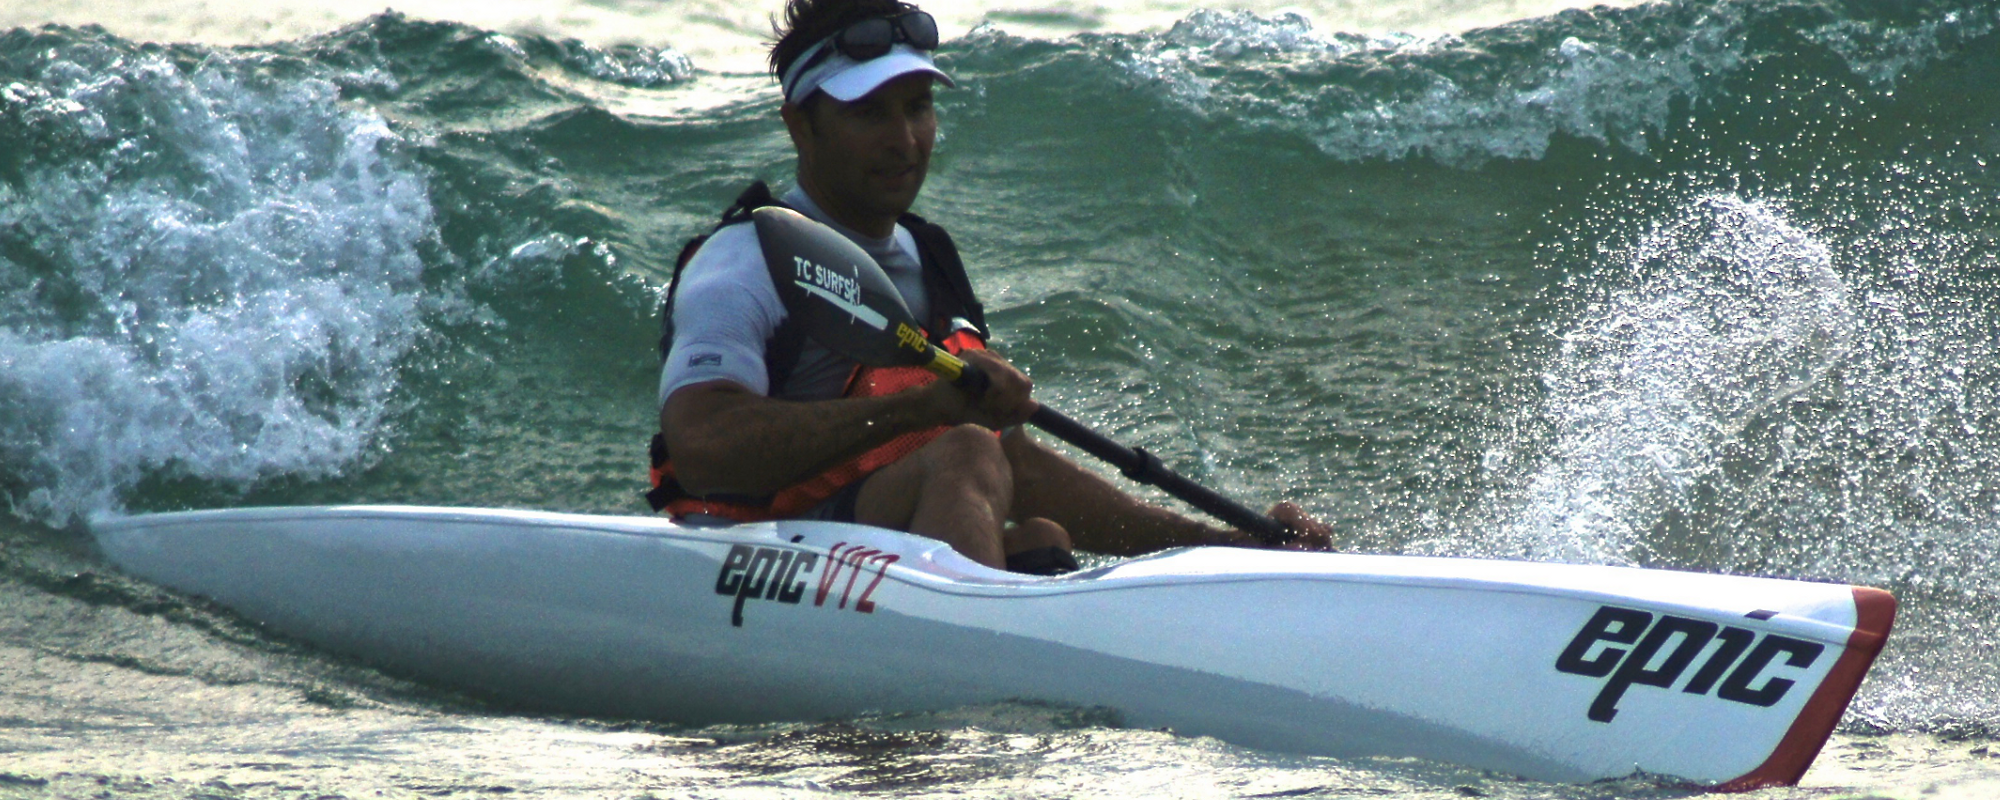 Downwind Paddling Tips and Tricks To Make you Faster